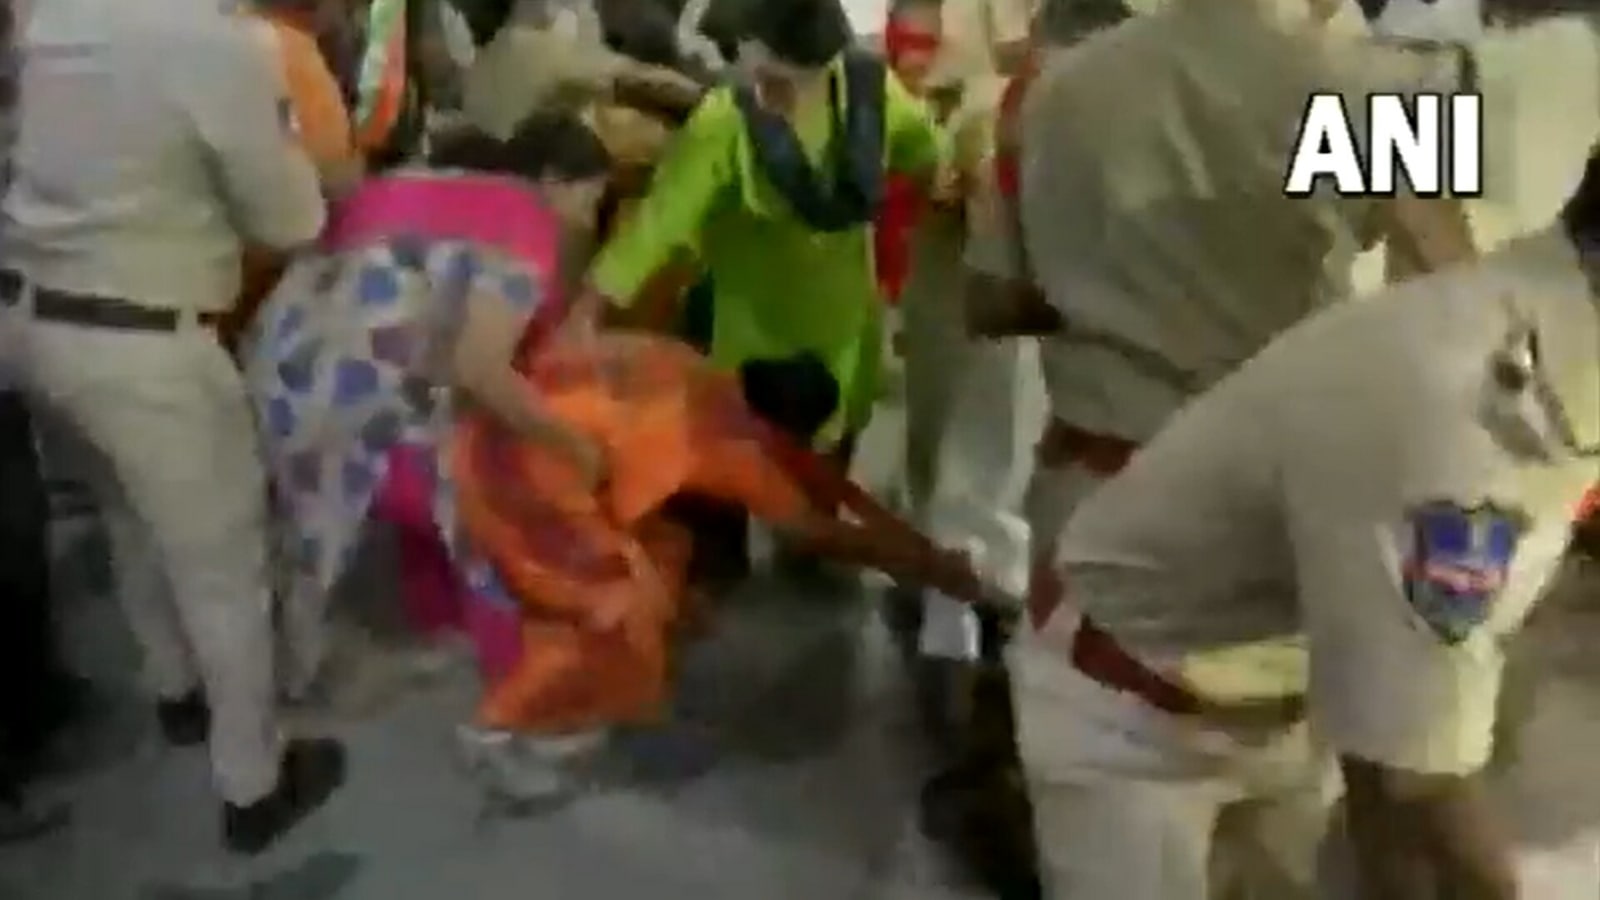 Saadhu Reap Sex - Hyderabad gang-rape: BJP leaders protest at Jubilee Hills Police Station |  Video | Latest News India - Hindustan Times